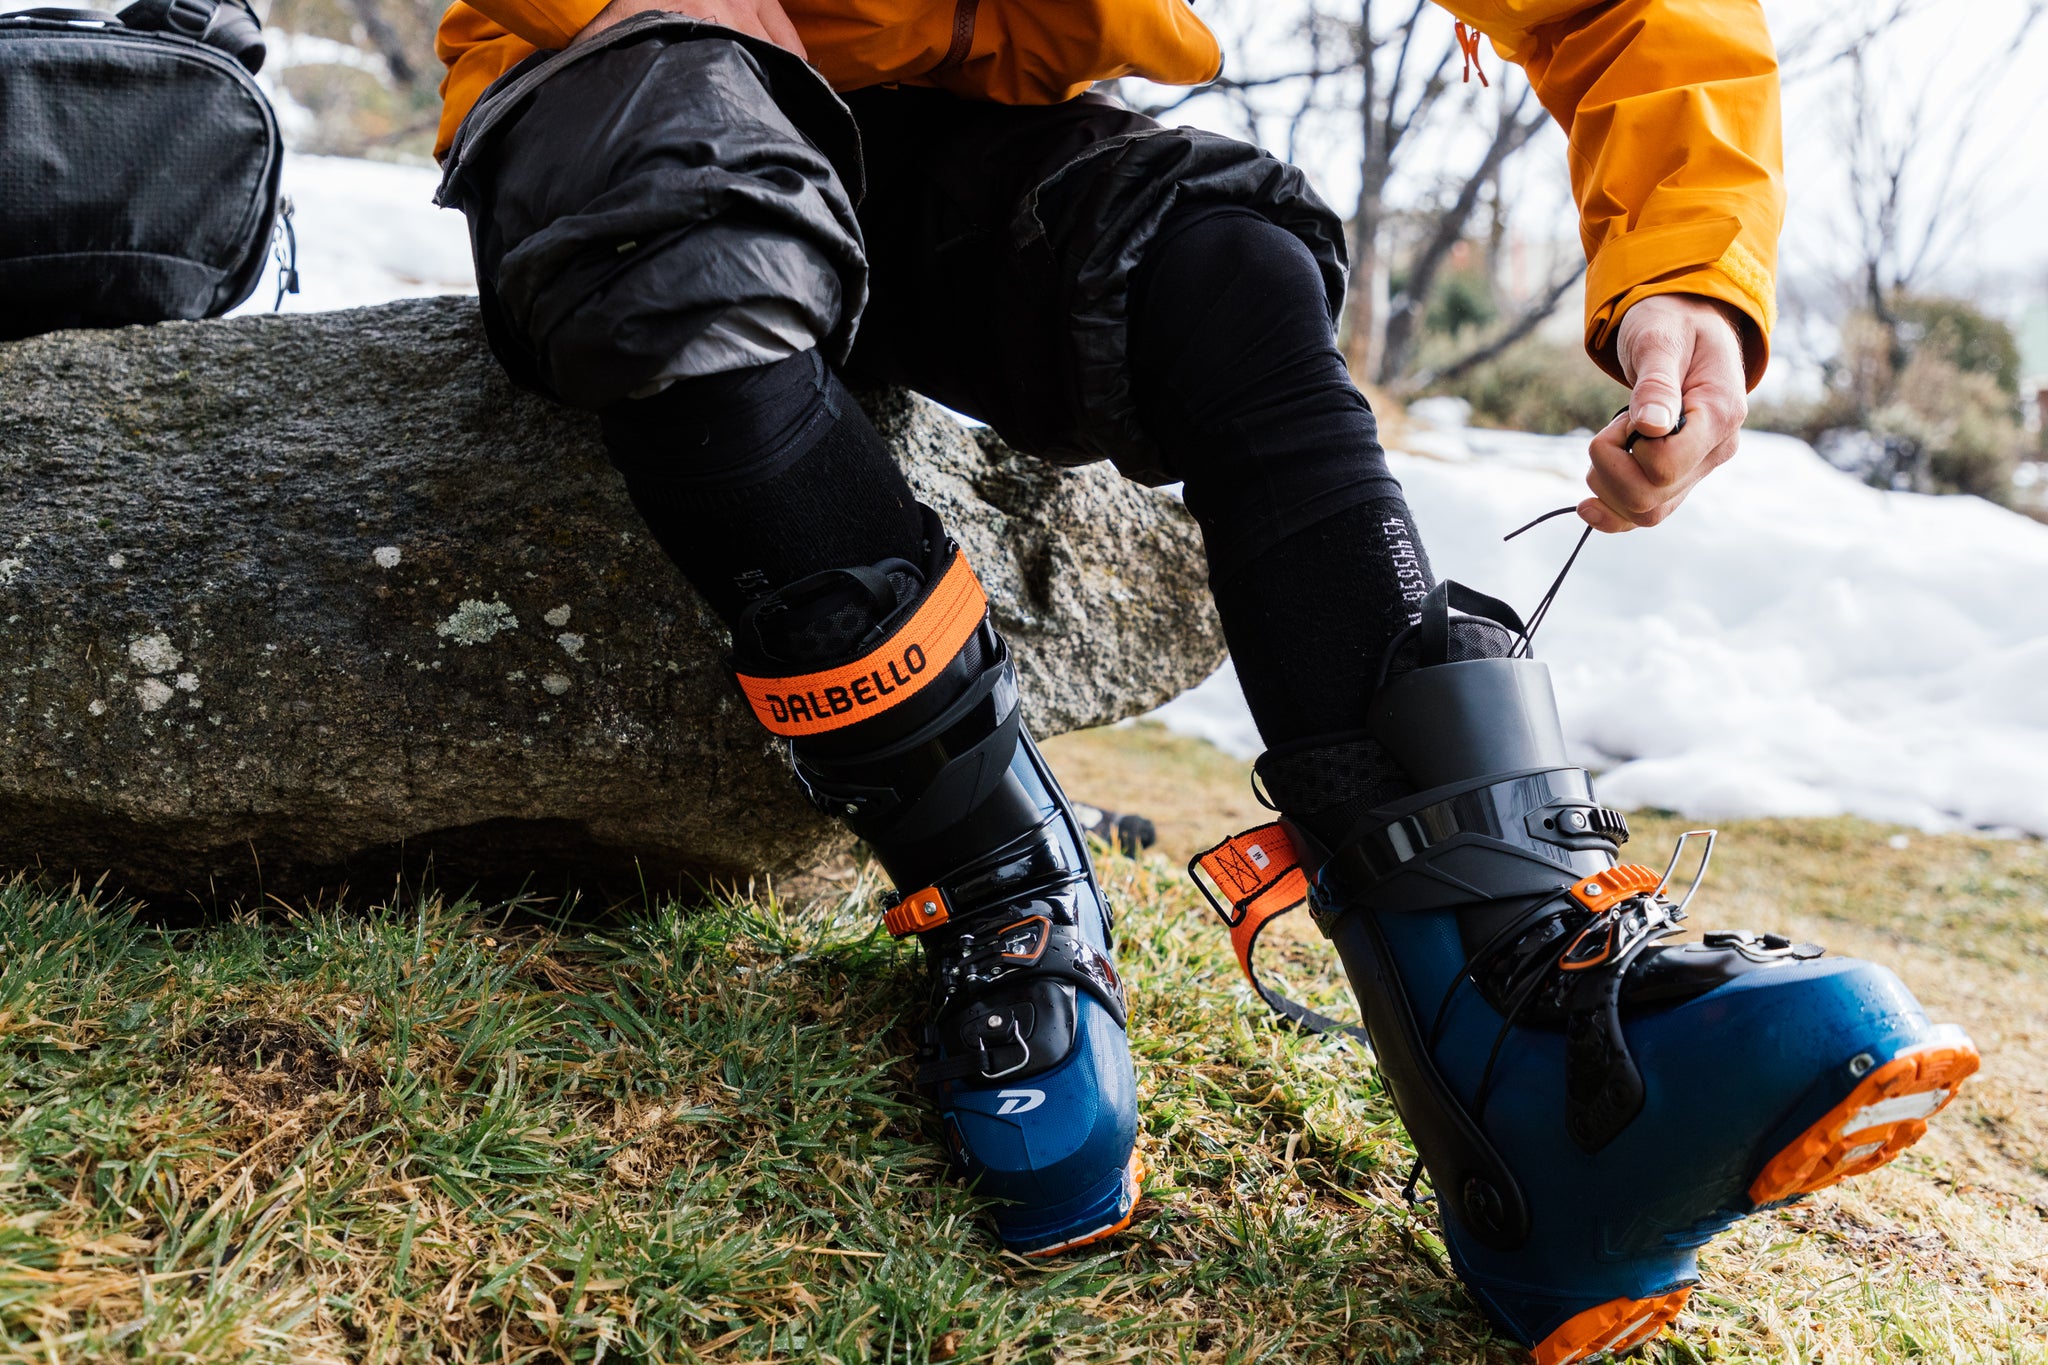 Comfort and Performance — Picking The Perfect Pair of Ski Socks